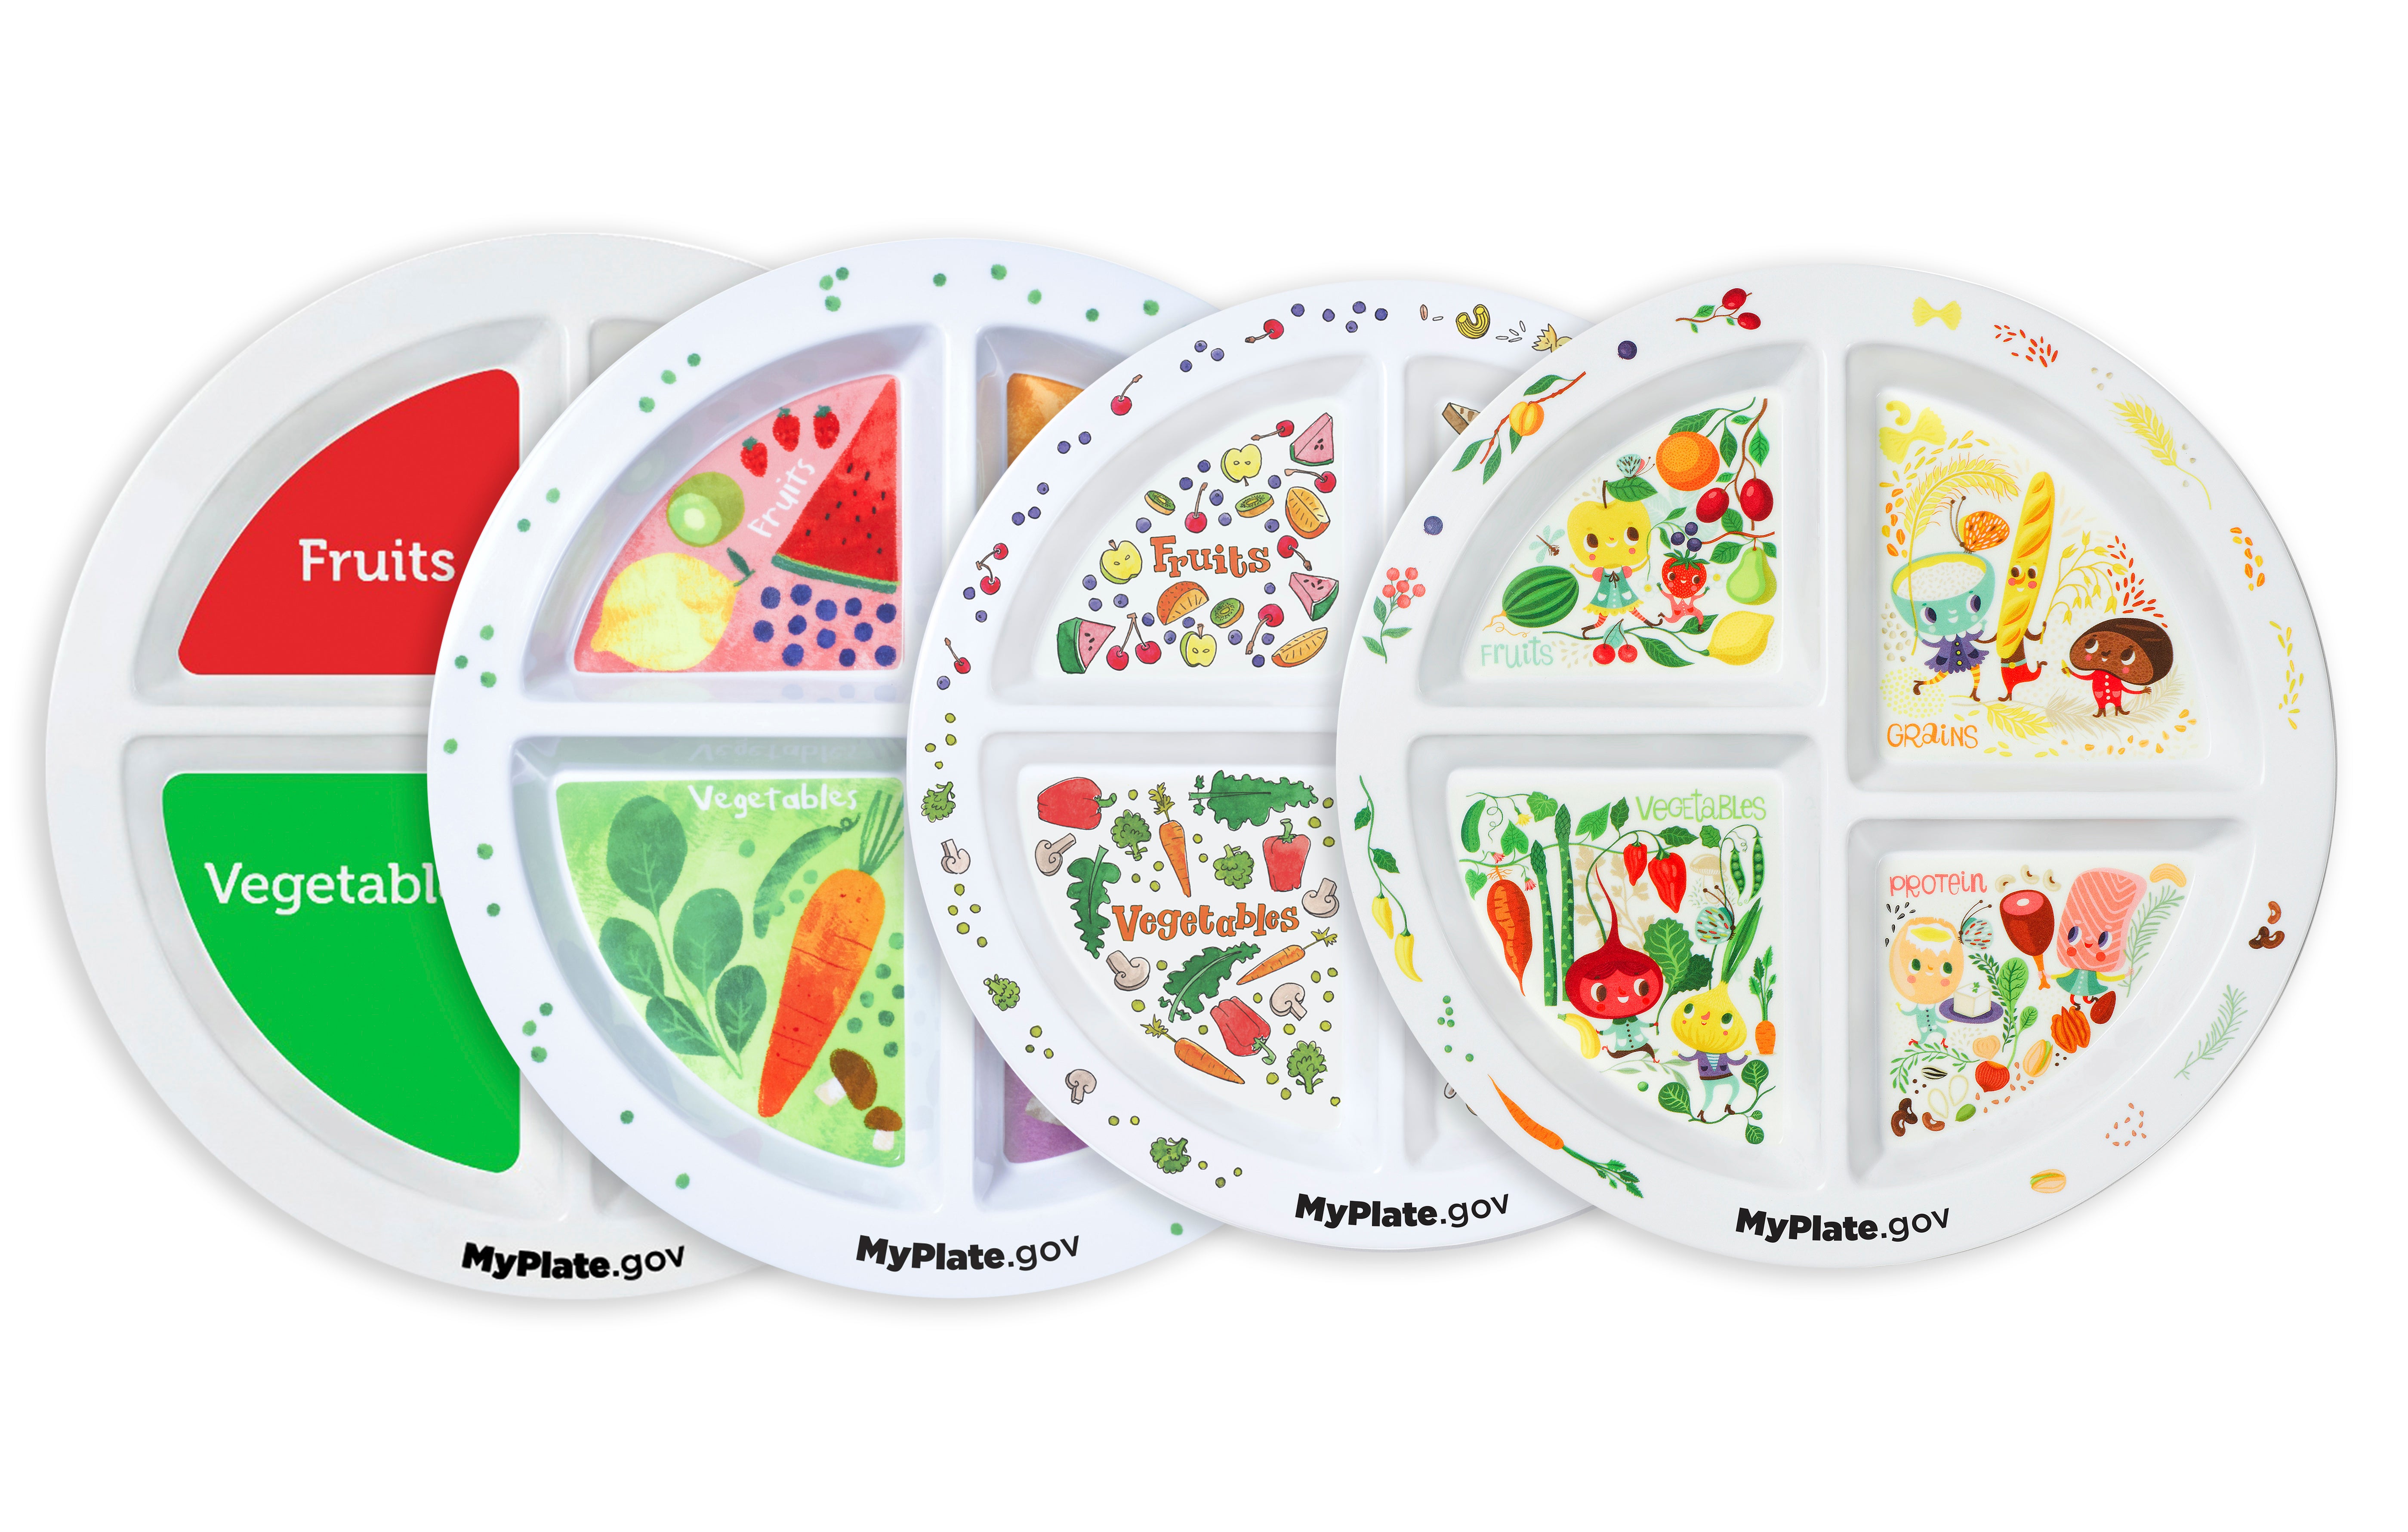 portion control plate<br>portion plate<br>portion food plate<br>food portion plates<br>adult portion plate<br>portion bowls<br>portion <a href=